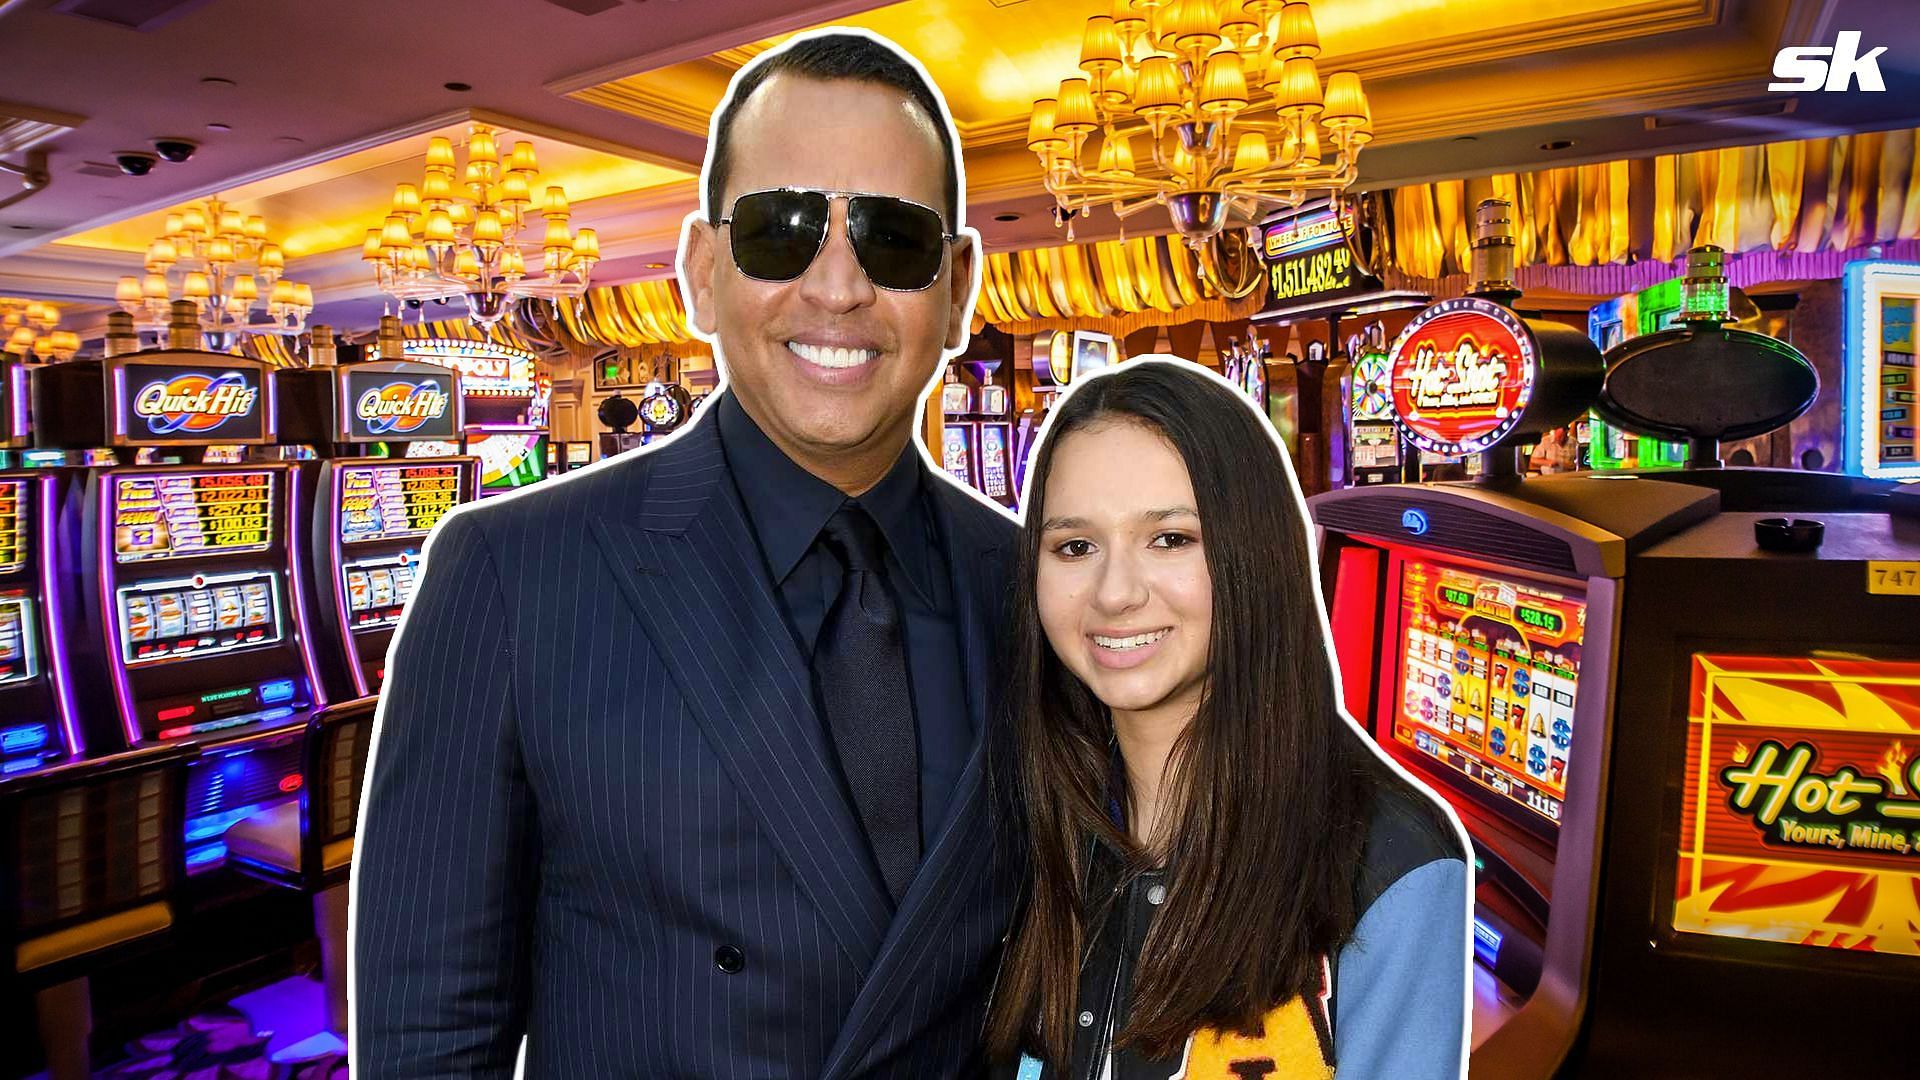 Alex Rodriguez enjoyed a poker night with daughter Ella